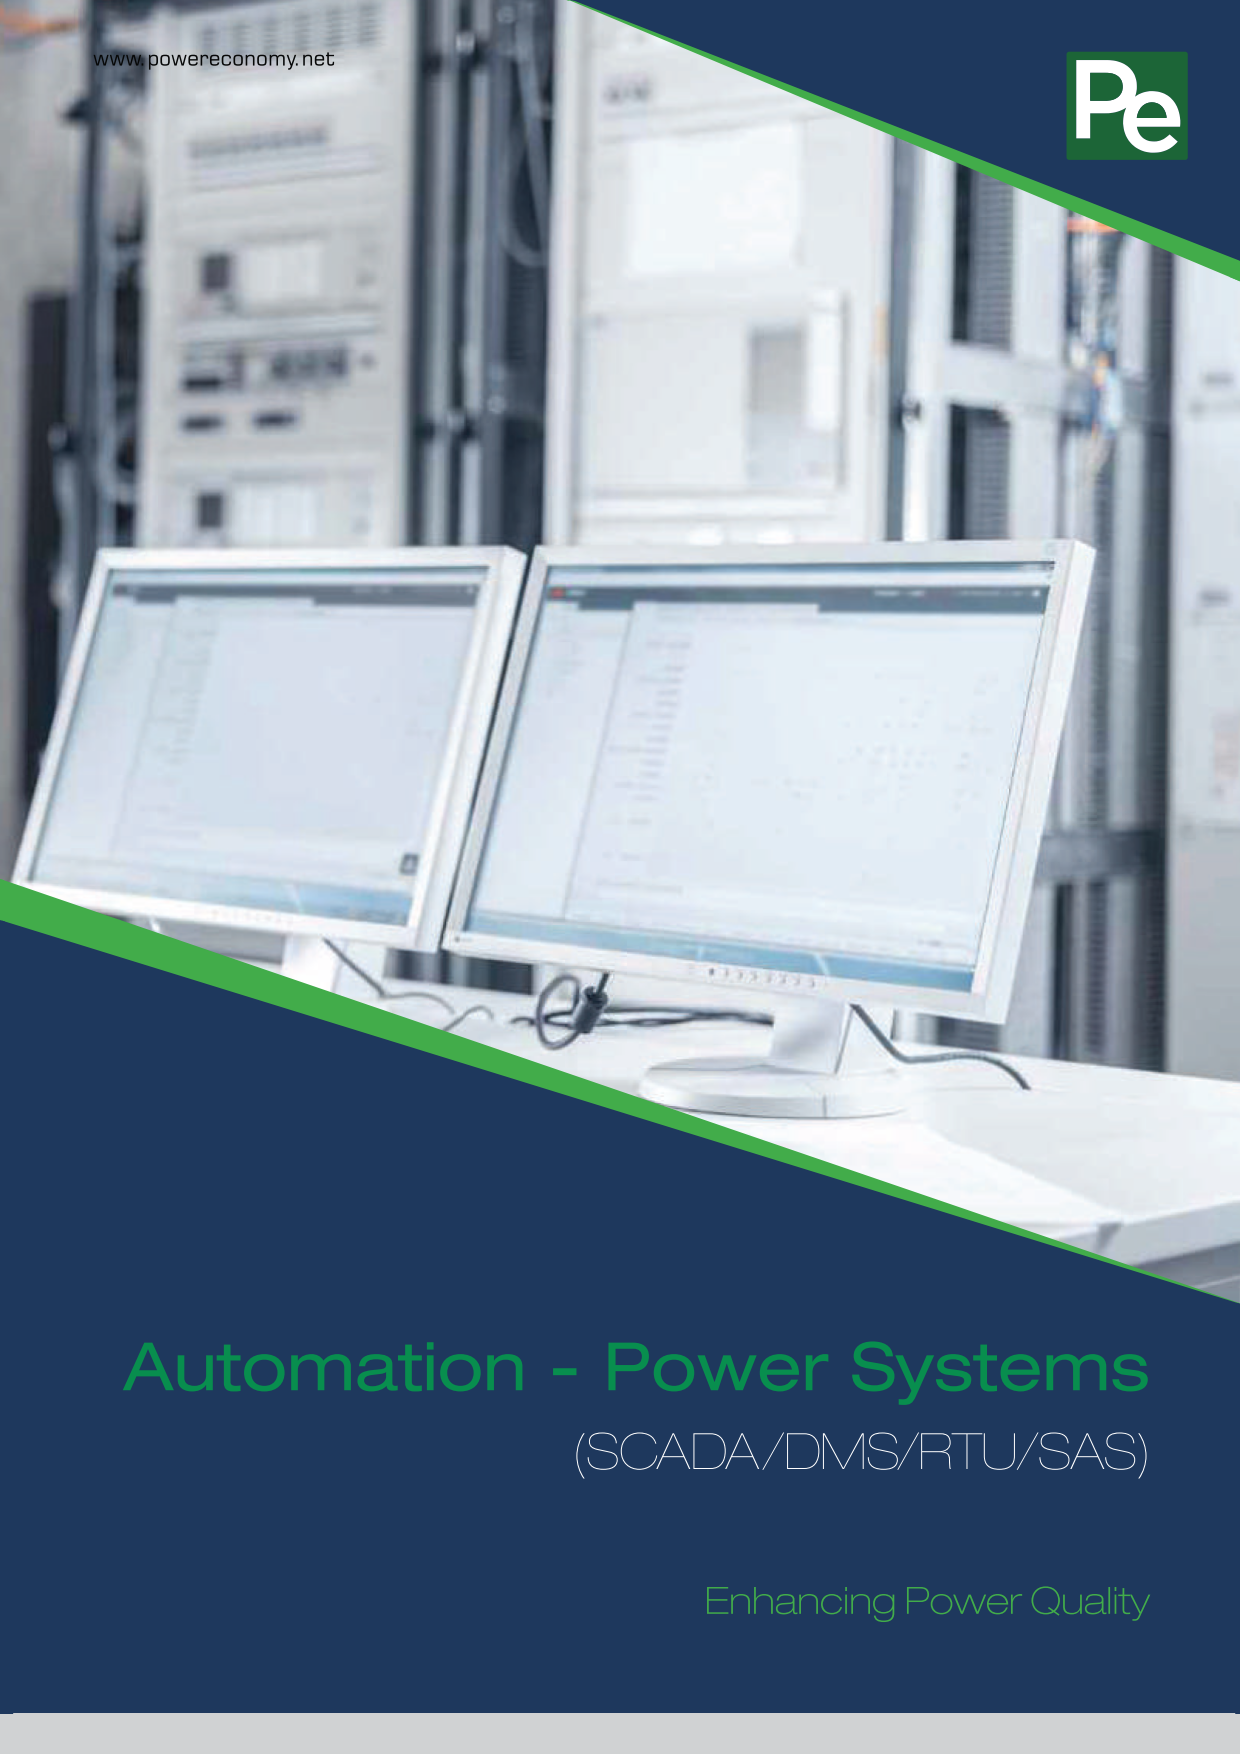 //powereconomy.net/wp-content/uploads/2022/09/Automation-Power-Systems.png